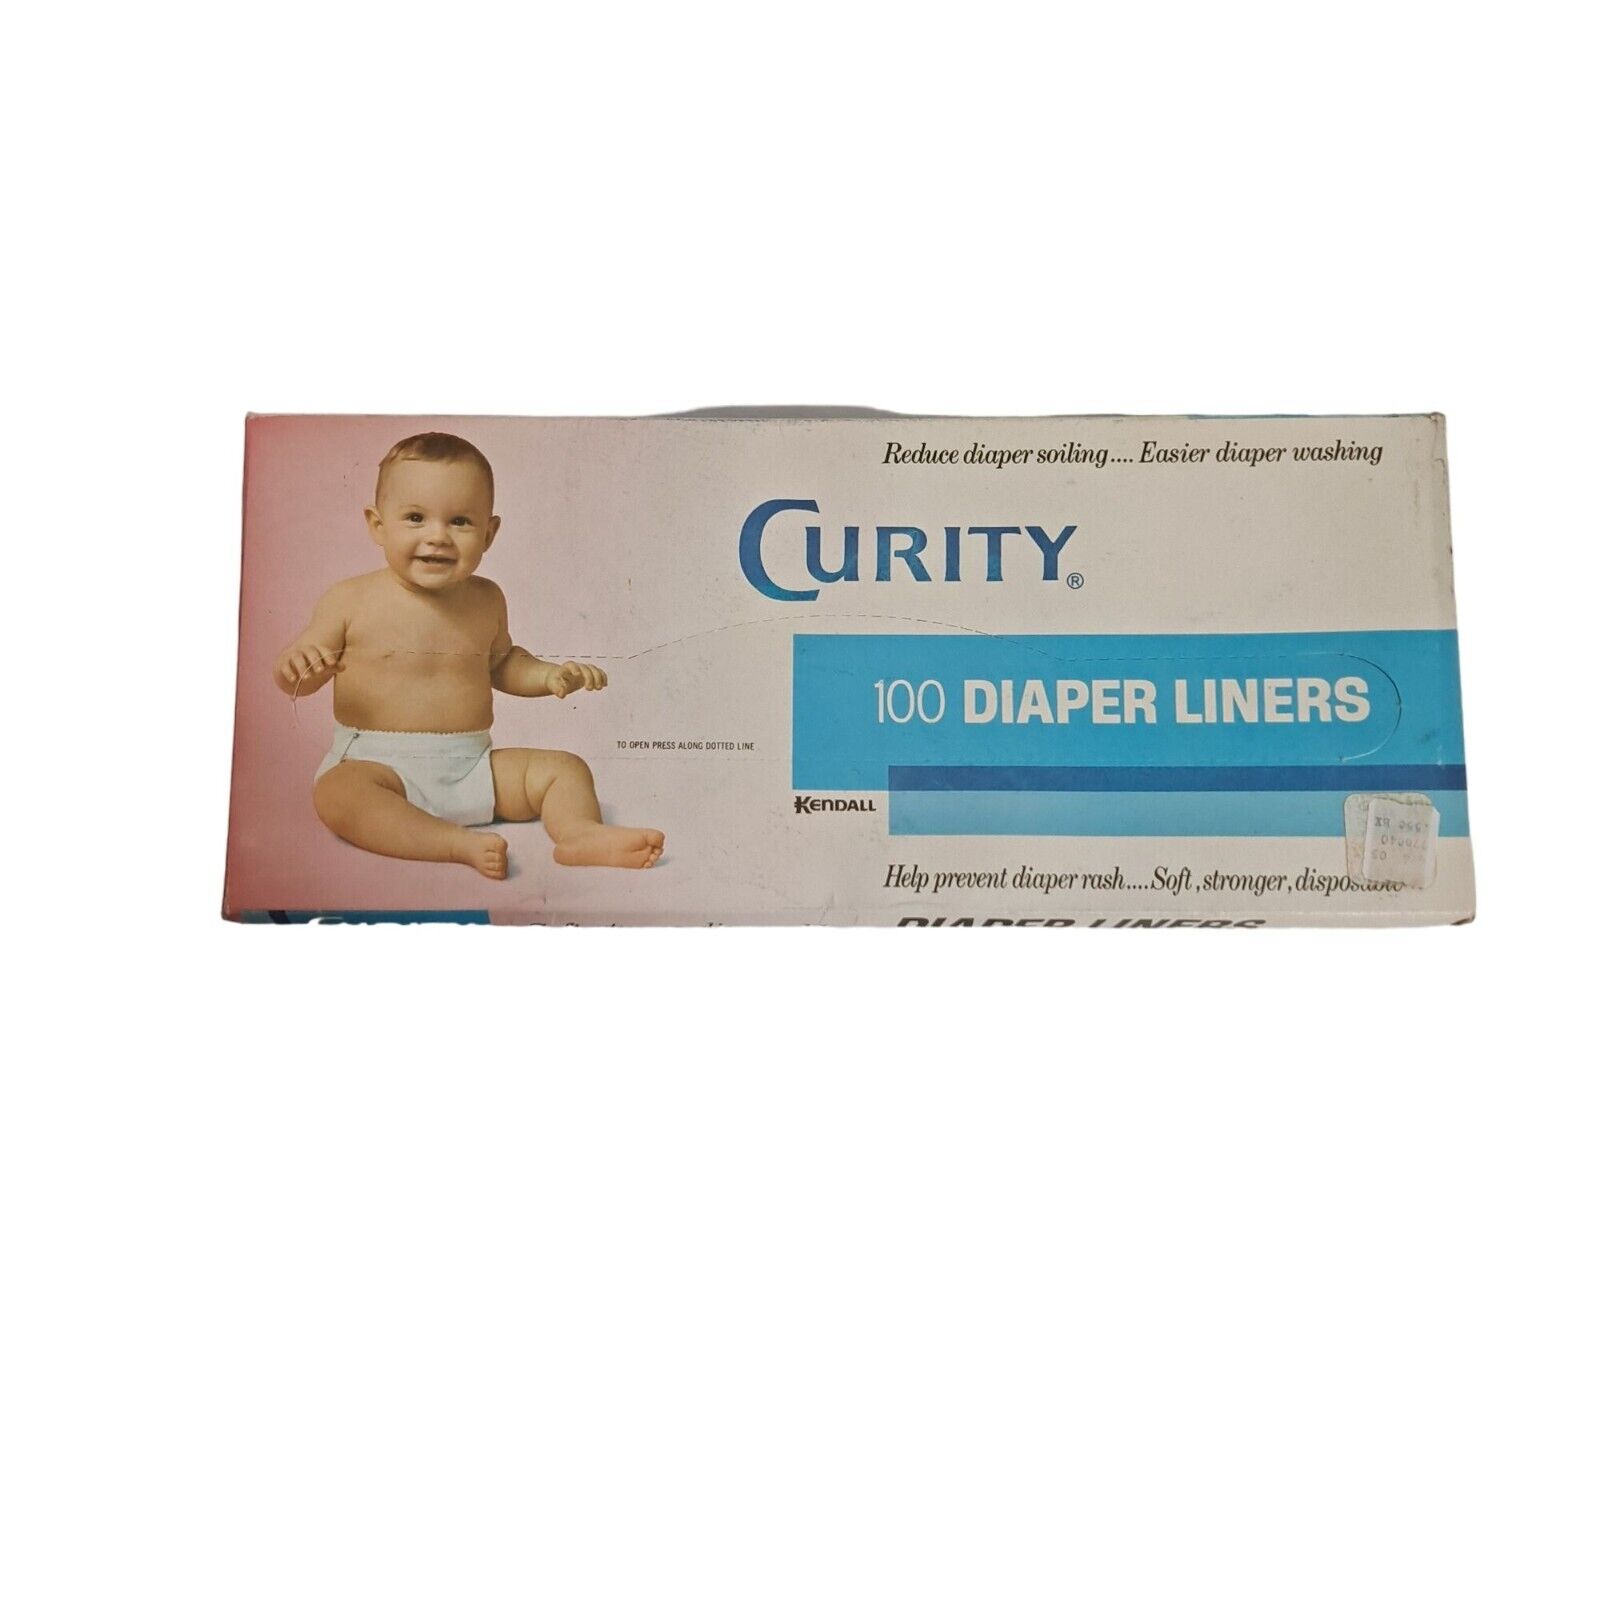 Vintage Curity Diaper Liners 100 Count NEW Old Stock Sealed Disposable 1970s